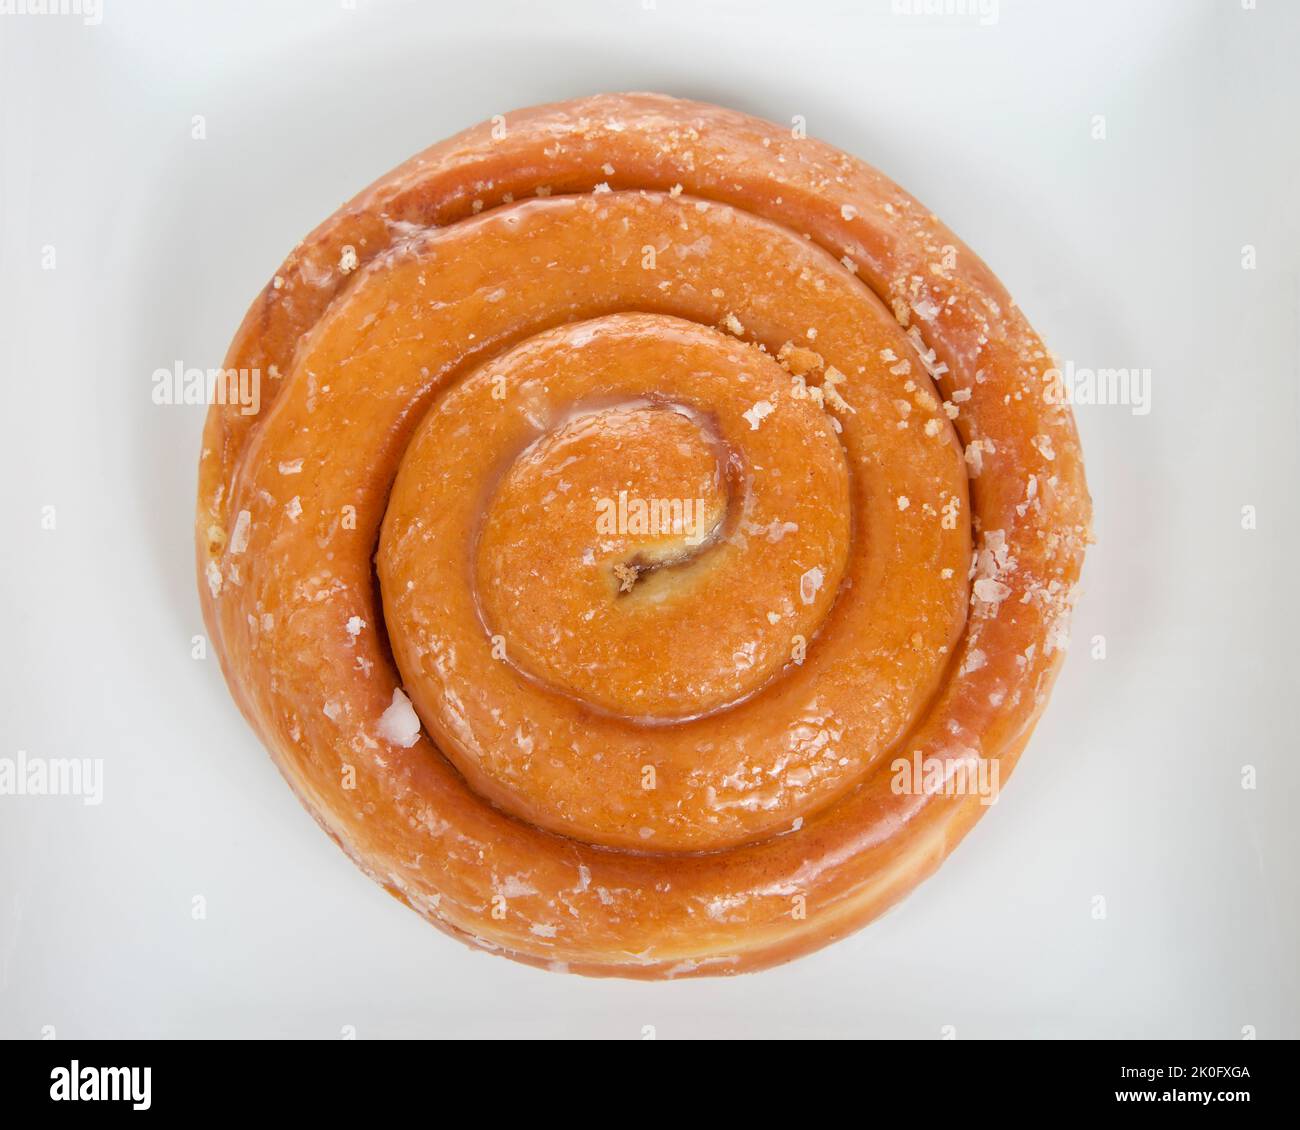 Top view flat lay of one cinnamon roll large round donut on a square off white porcelain plate, isolated on white Stock Photo